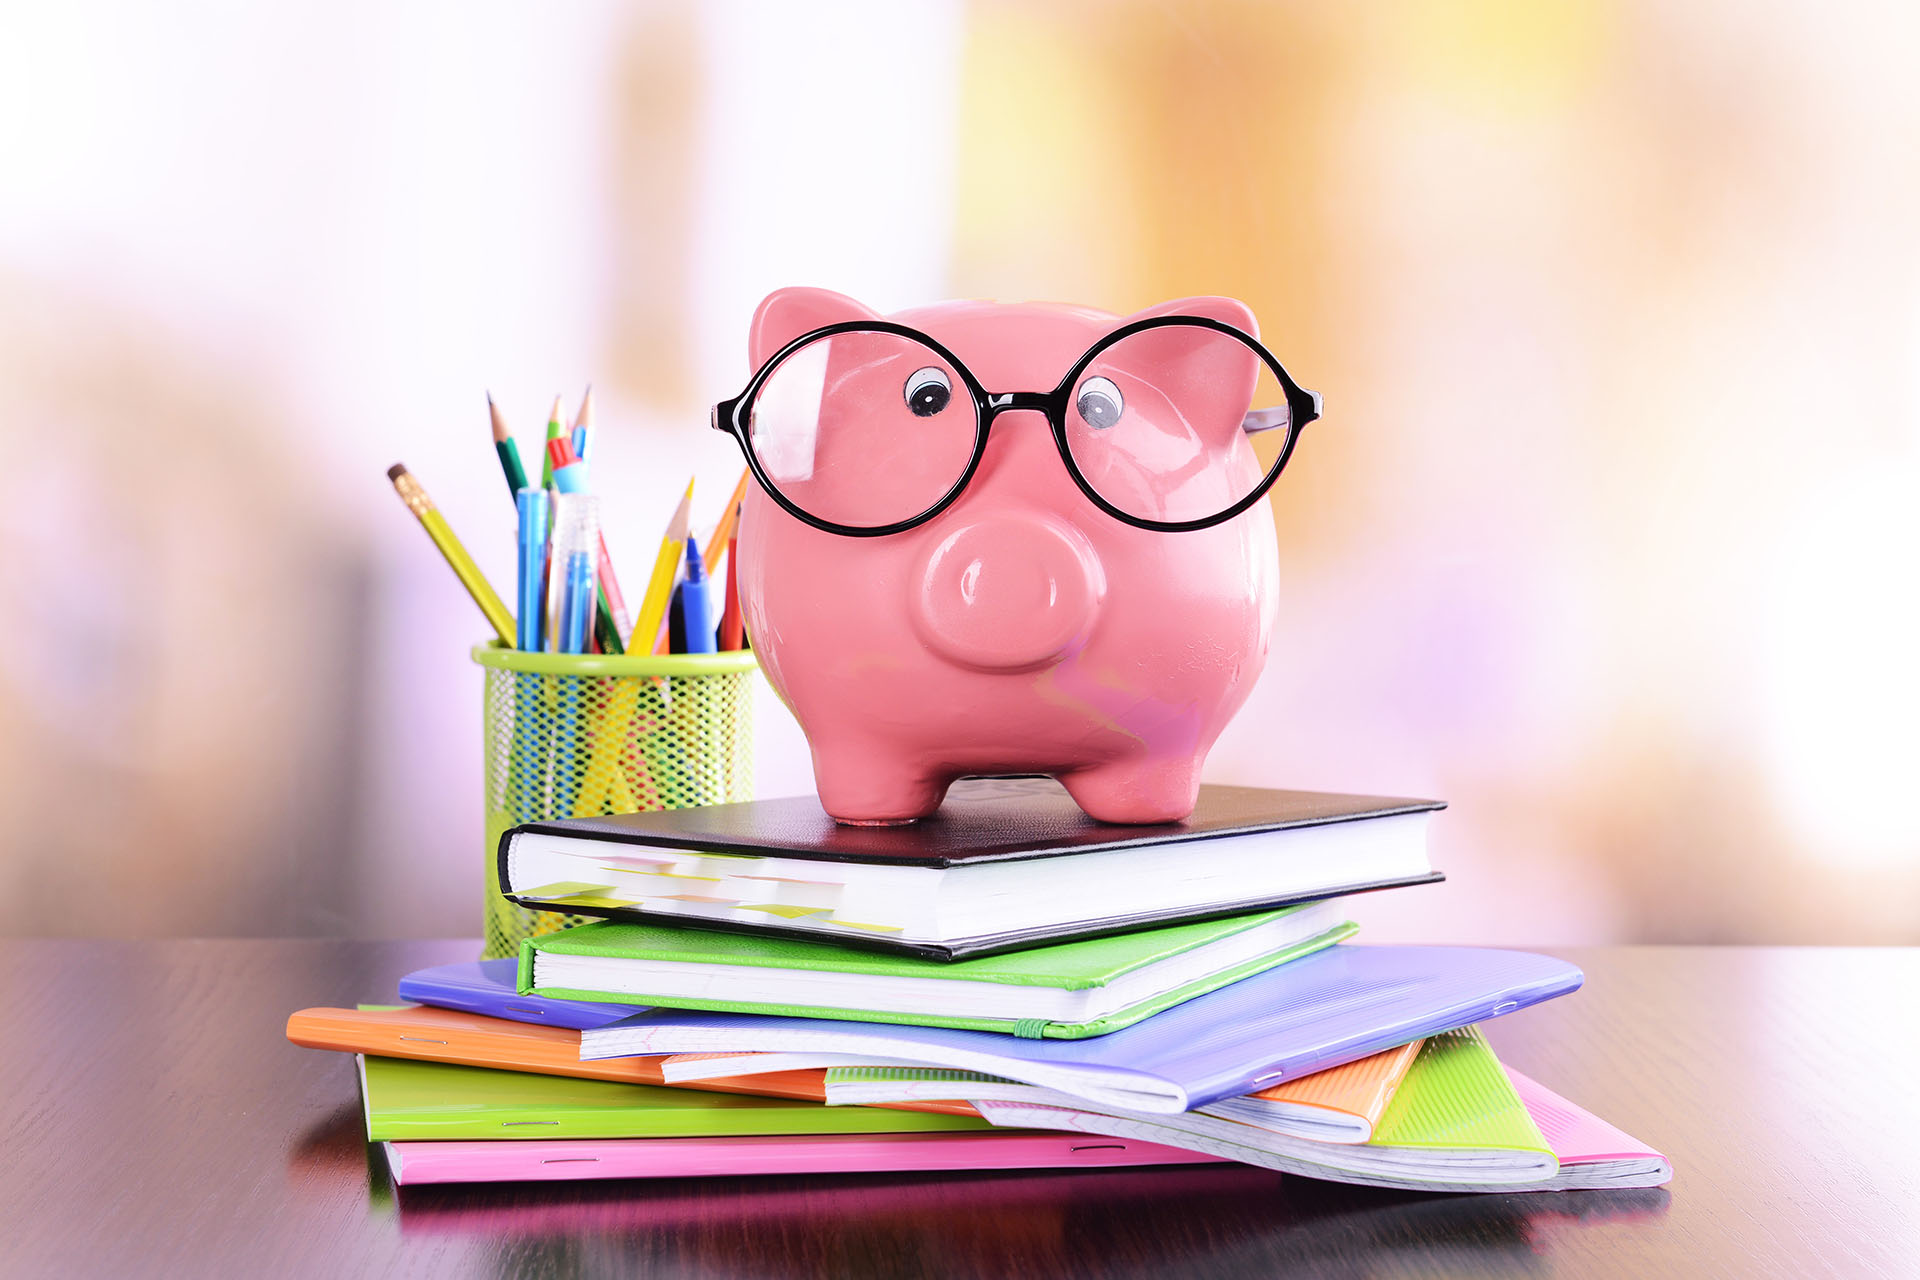 Piggy bank wearing glasses sits on a stack of notebooks and a planner next to a pencil cup filled with colored pencils, pens, and pencils on a wooden surface.